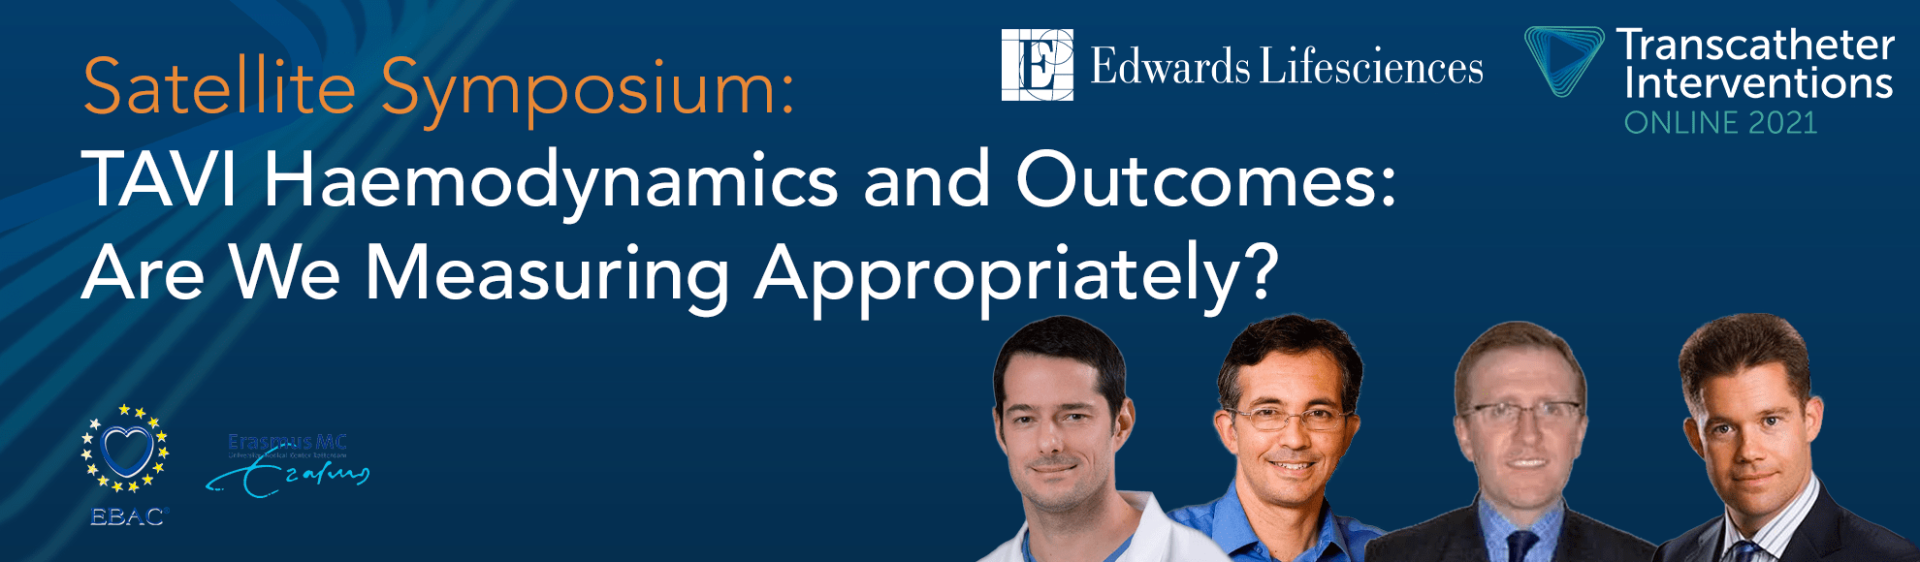 TAVI Haemodynamics and Outcomes: Are We Measuring Appropriately?